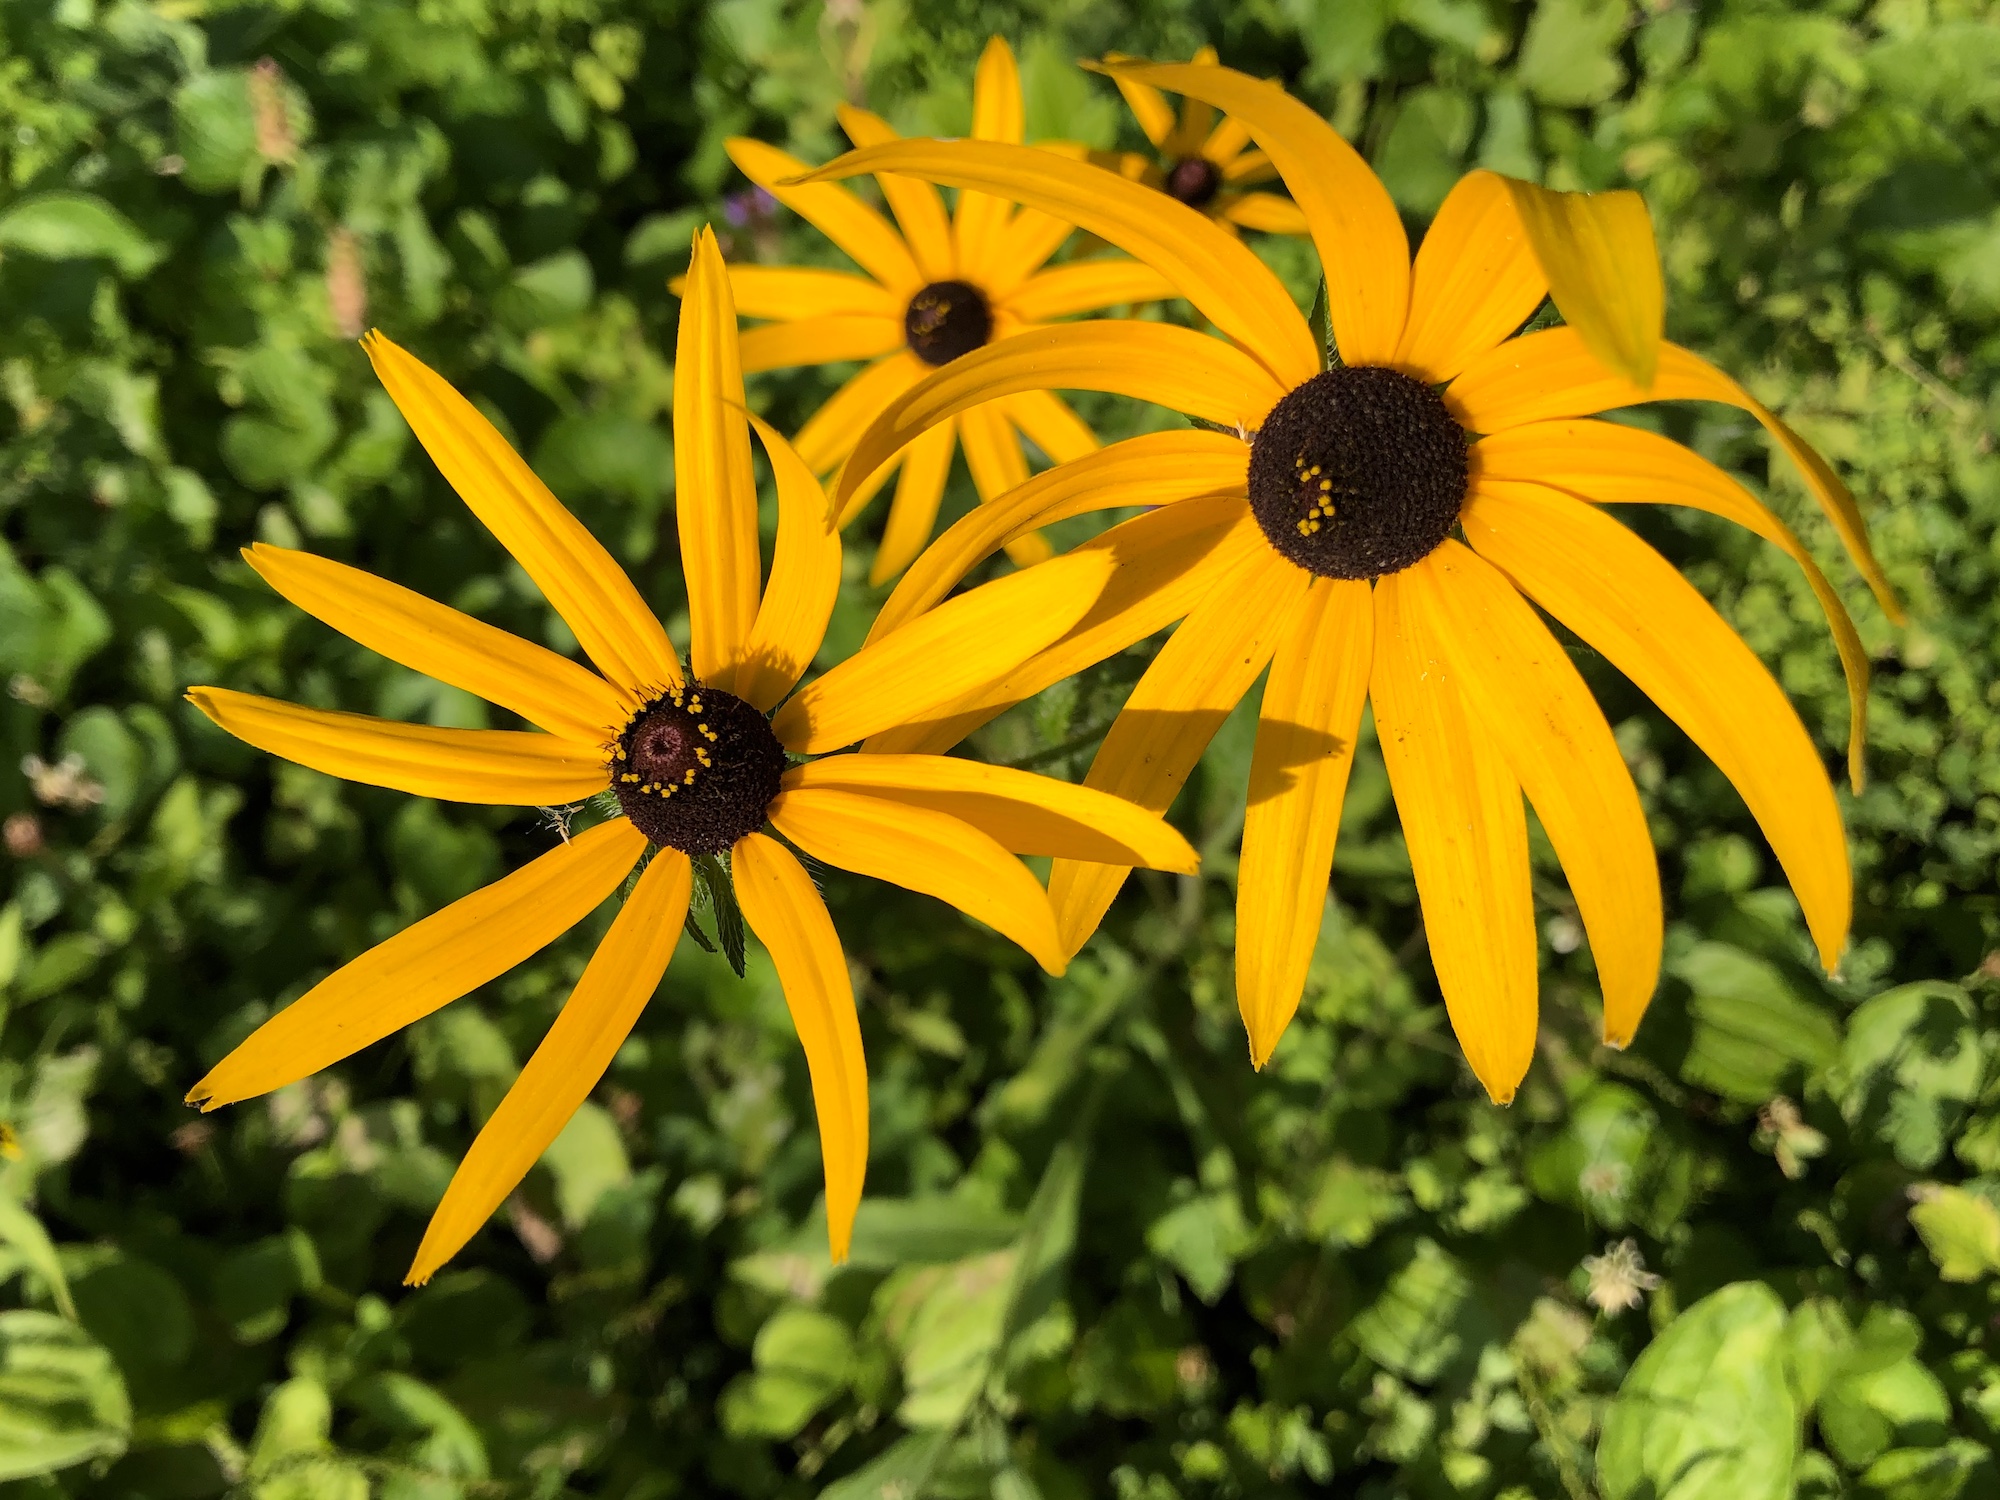 Black-eyed Susan on banks of Marion Dunn Pond in Madison, Wisconsin on July 31, 2020.